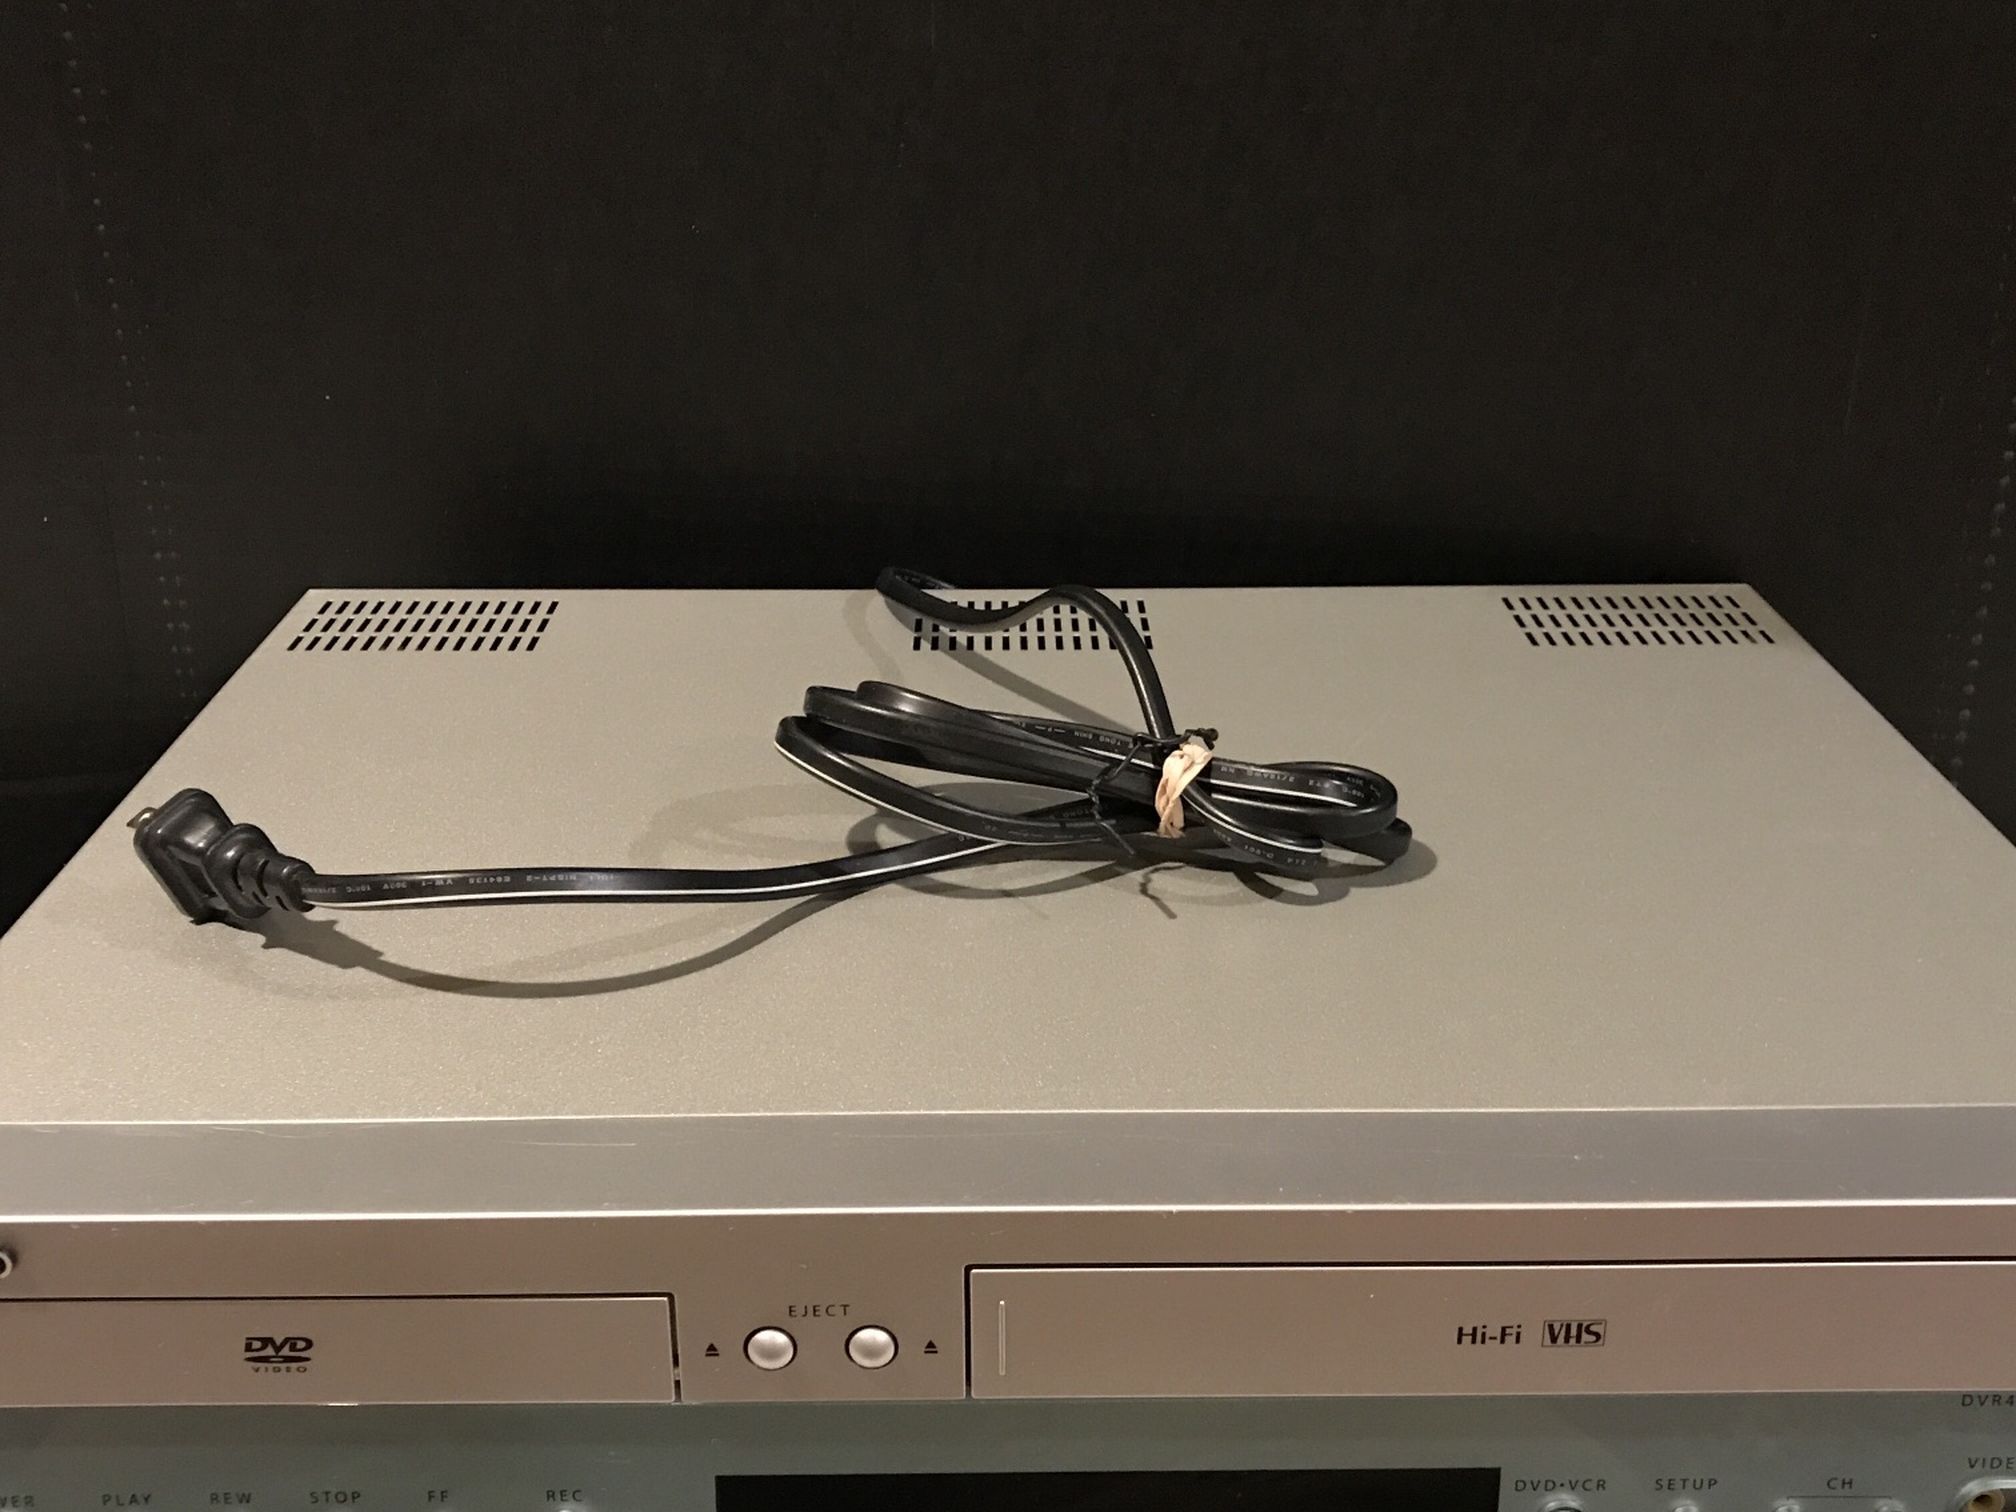 Go Video DVR4300 DVD Player VCR w/ Cables SERVICED & TESTED!!